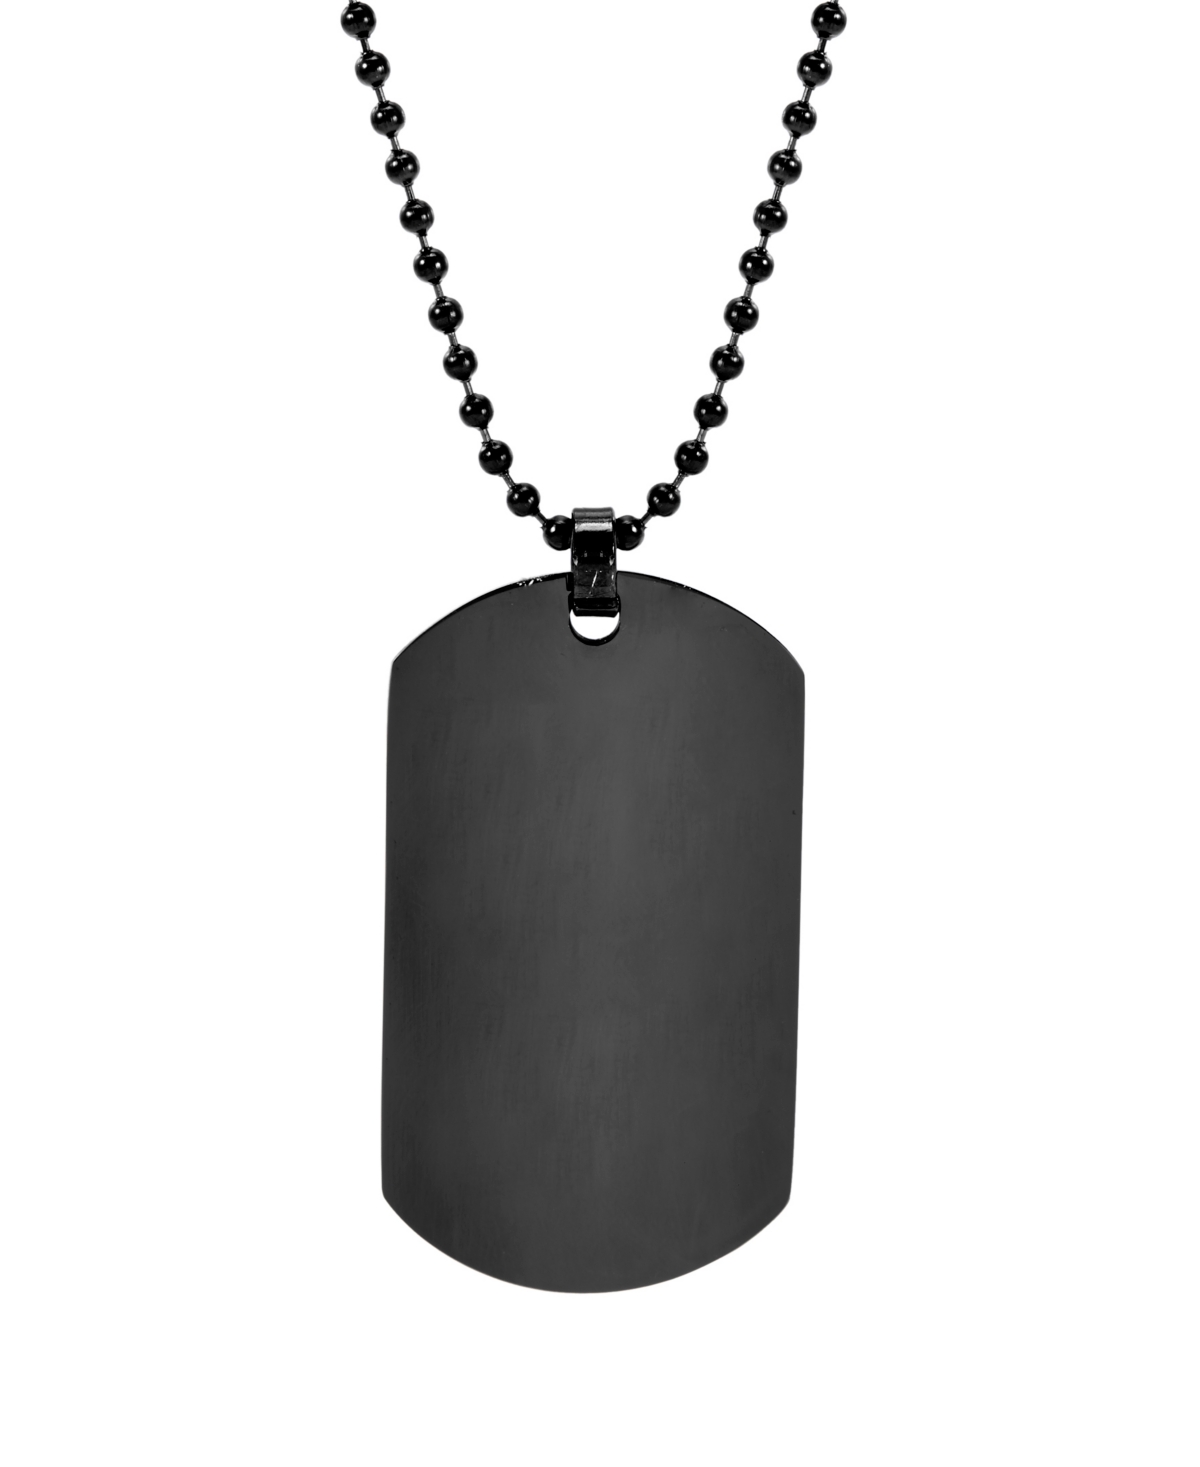 Eve's Jewelry Men's Large Stainless Steel Dog Tag